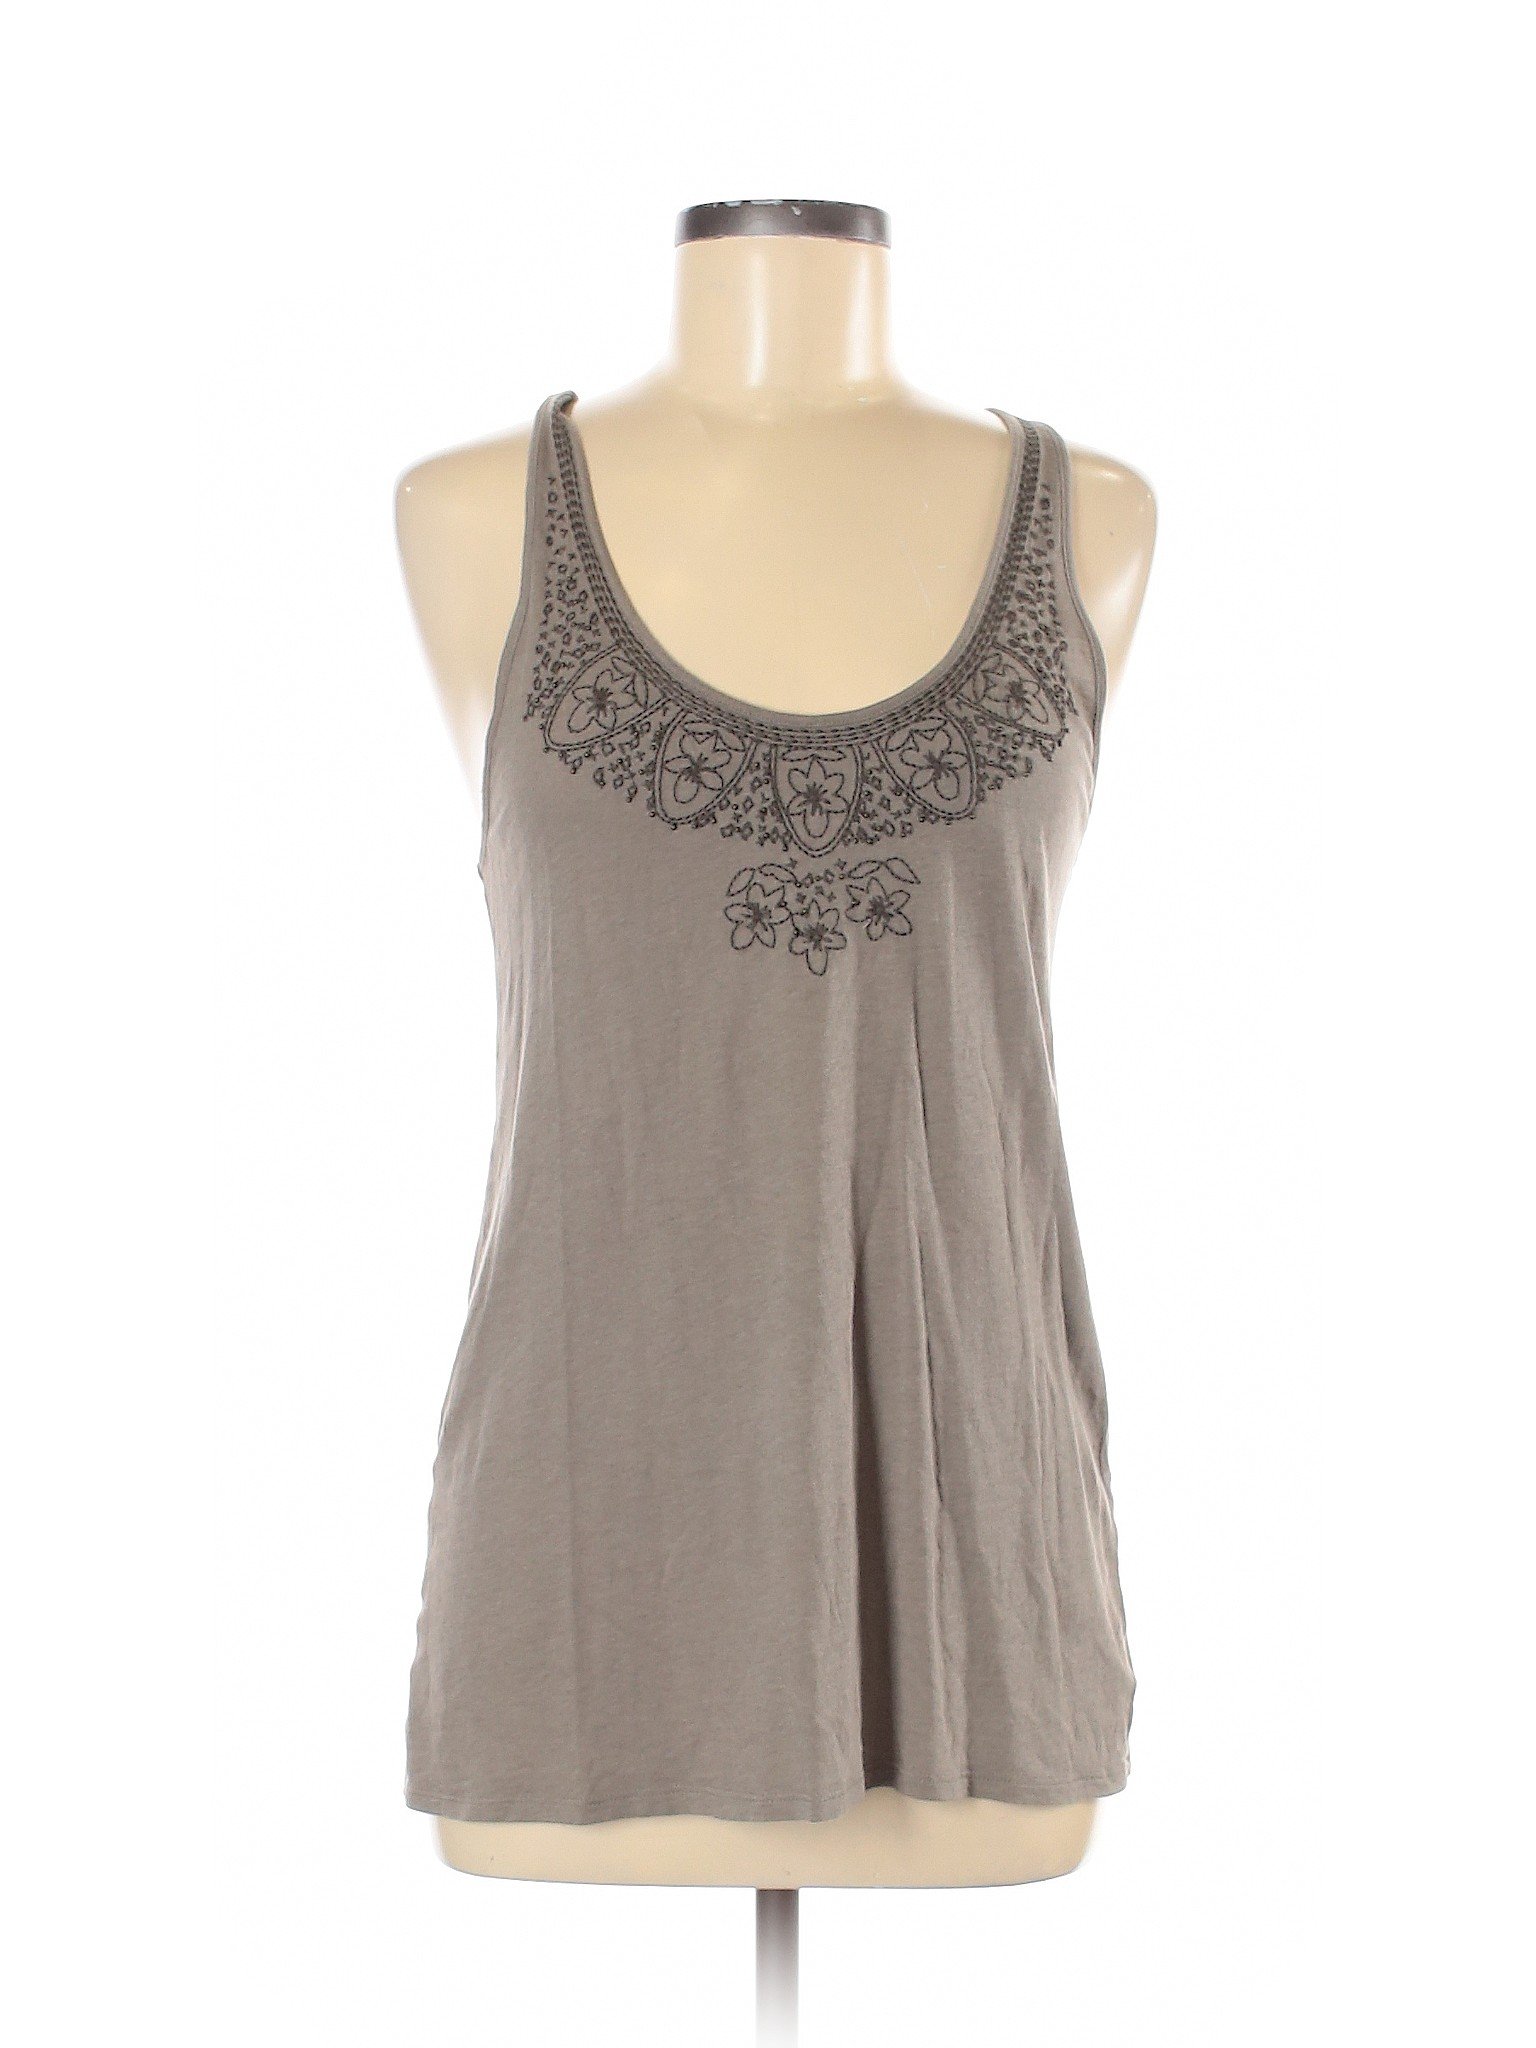 American Eagle Outfitters Women Brown Tank Top M | eBay